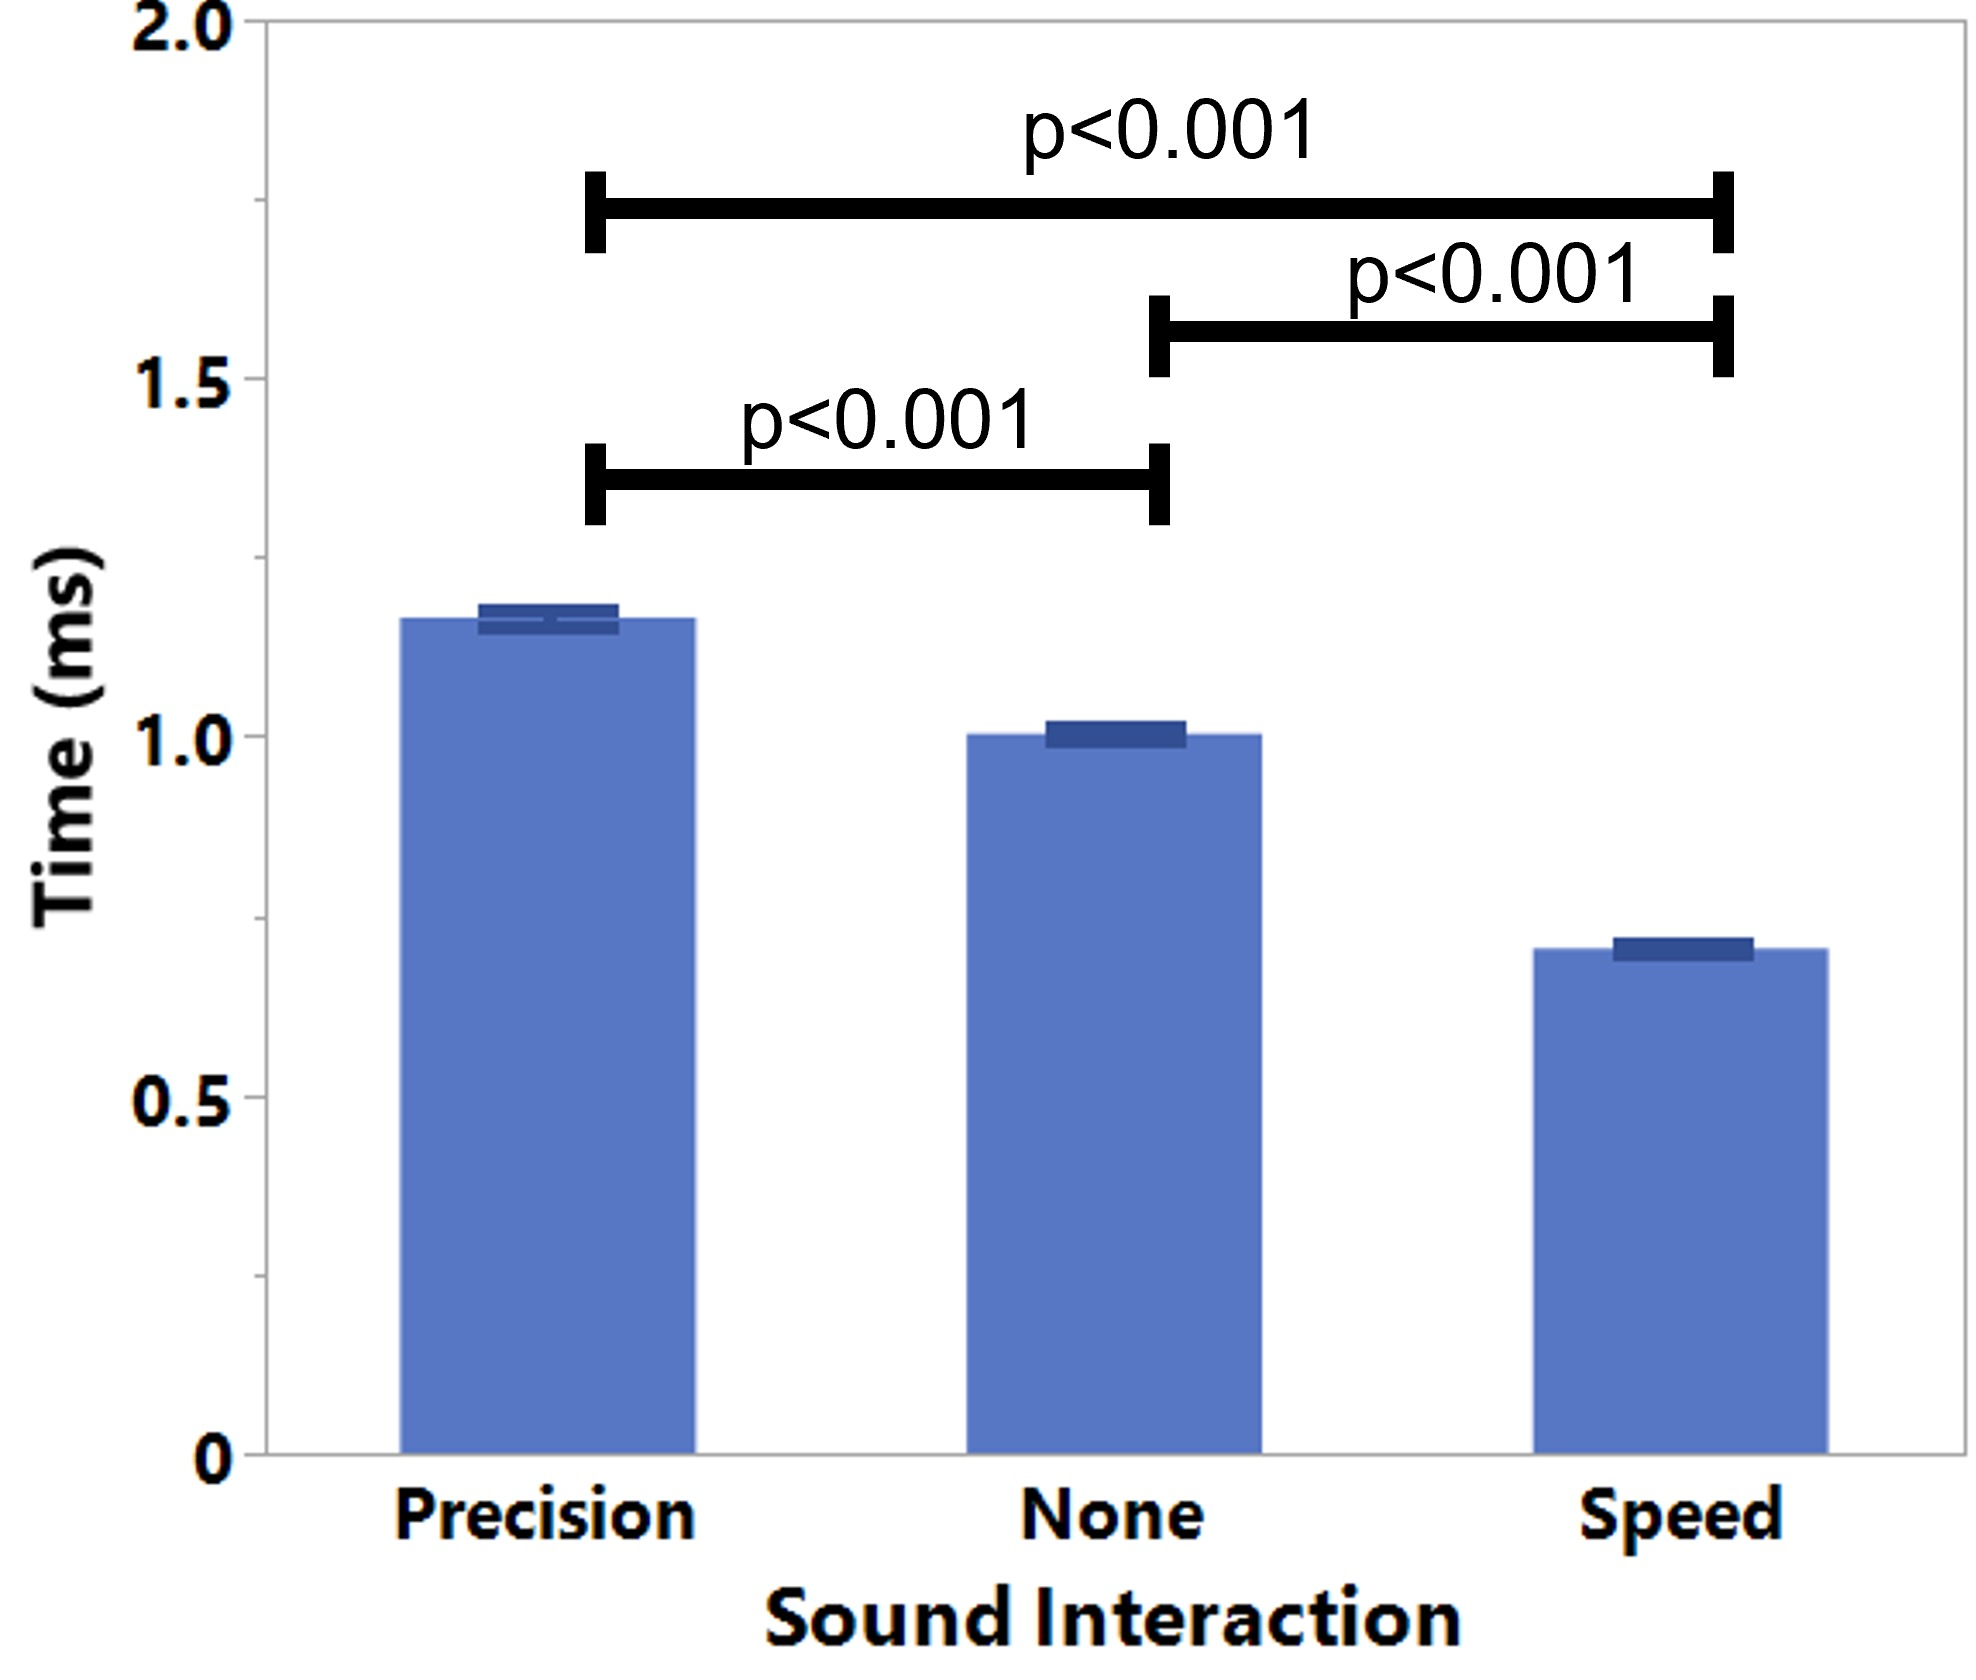 Improving Effective Throughput Performance using Auditory Feedback in Virtual Reality Training Systems